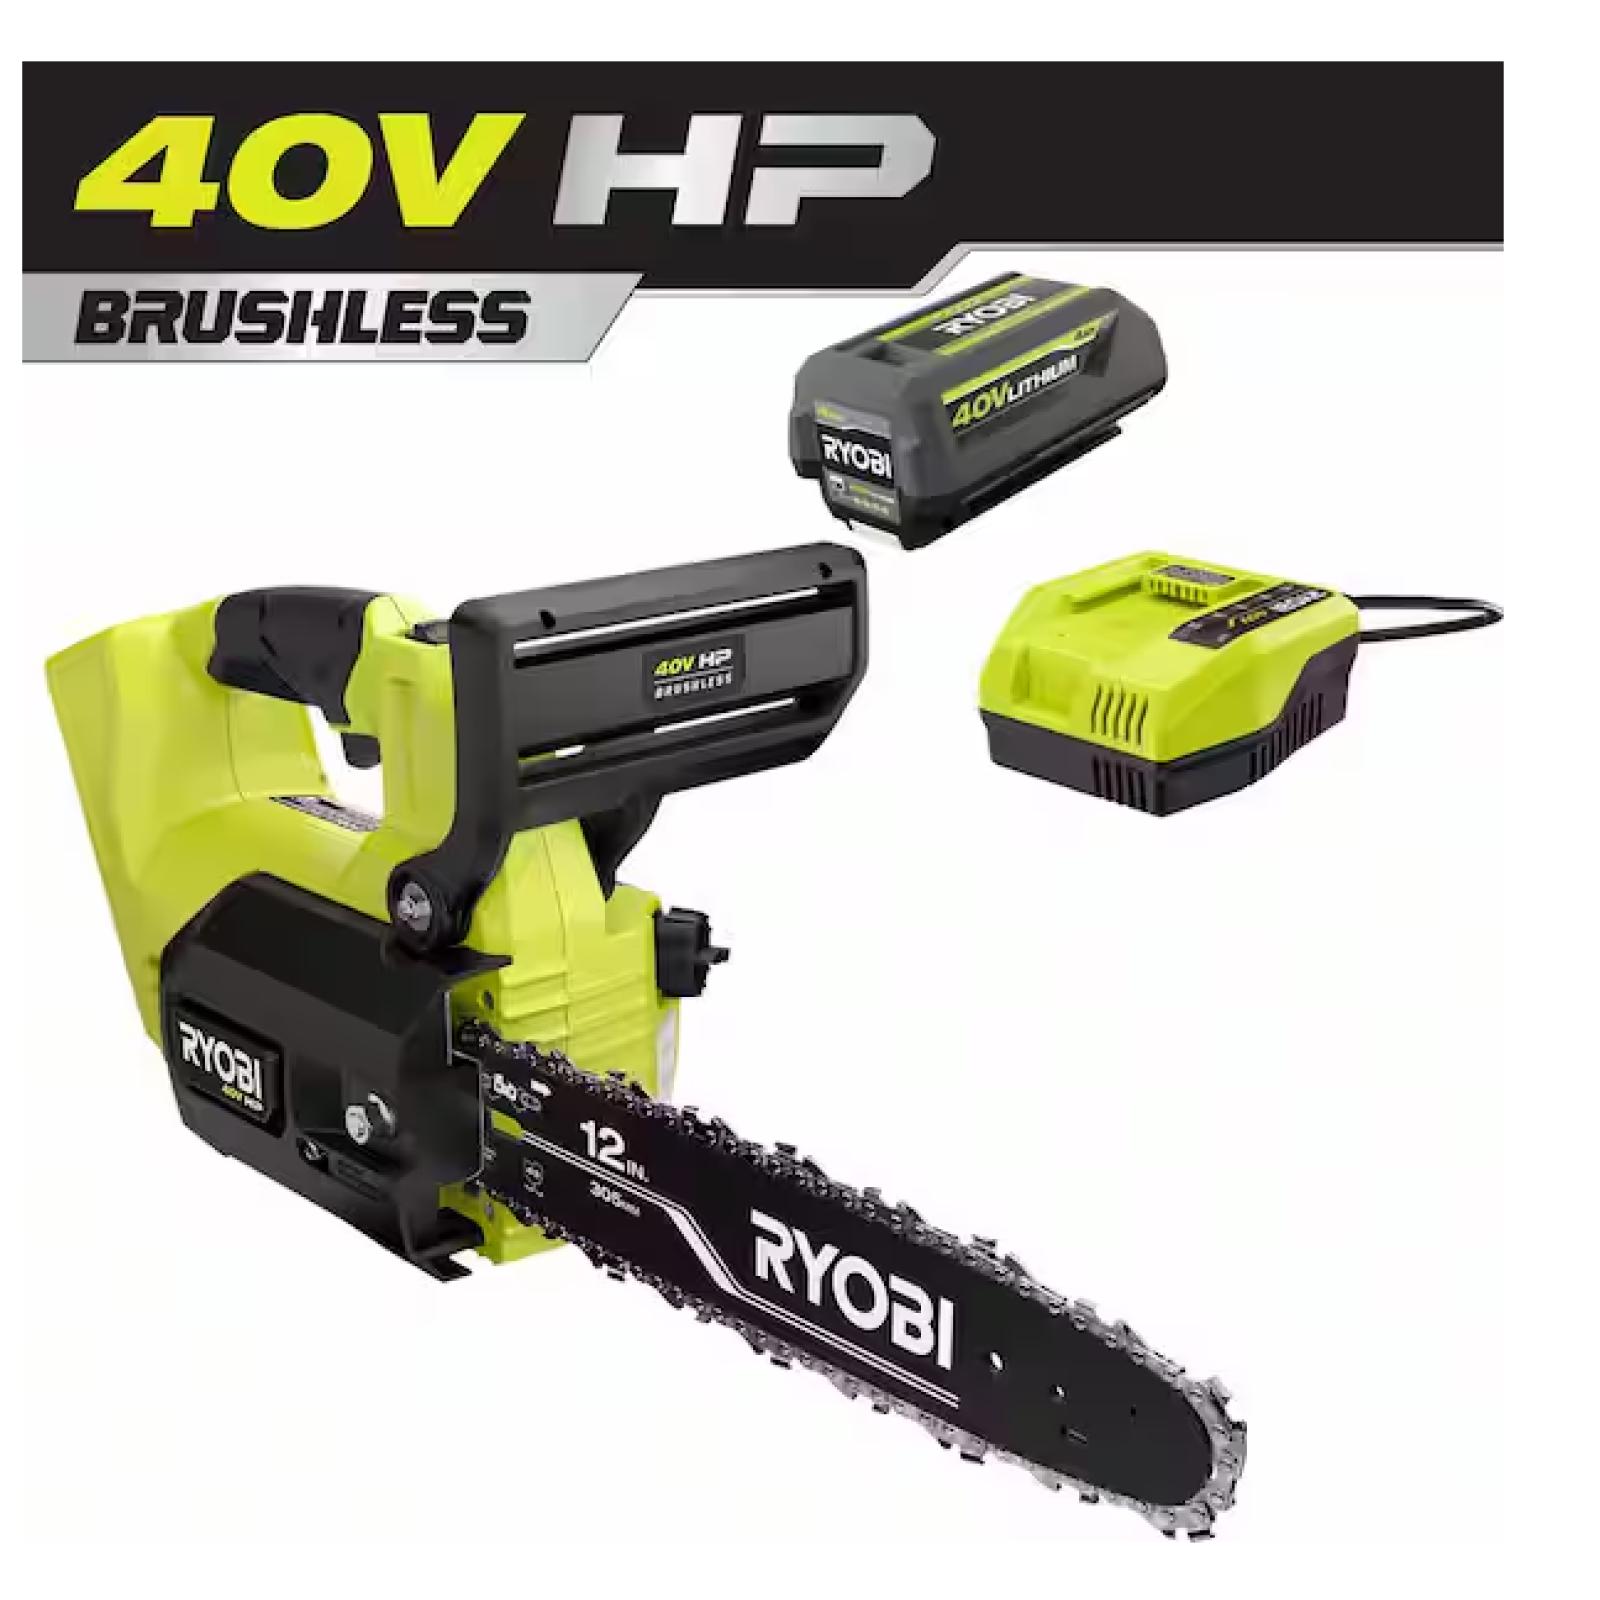 NEW! - RYOBI 40V HP Brushless 12 in. Top Handle Battery Chainsaw with 4.0 Battery and Charger